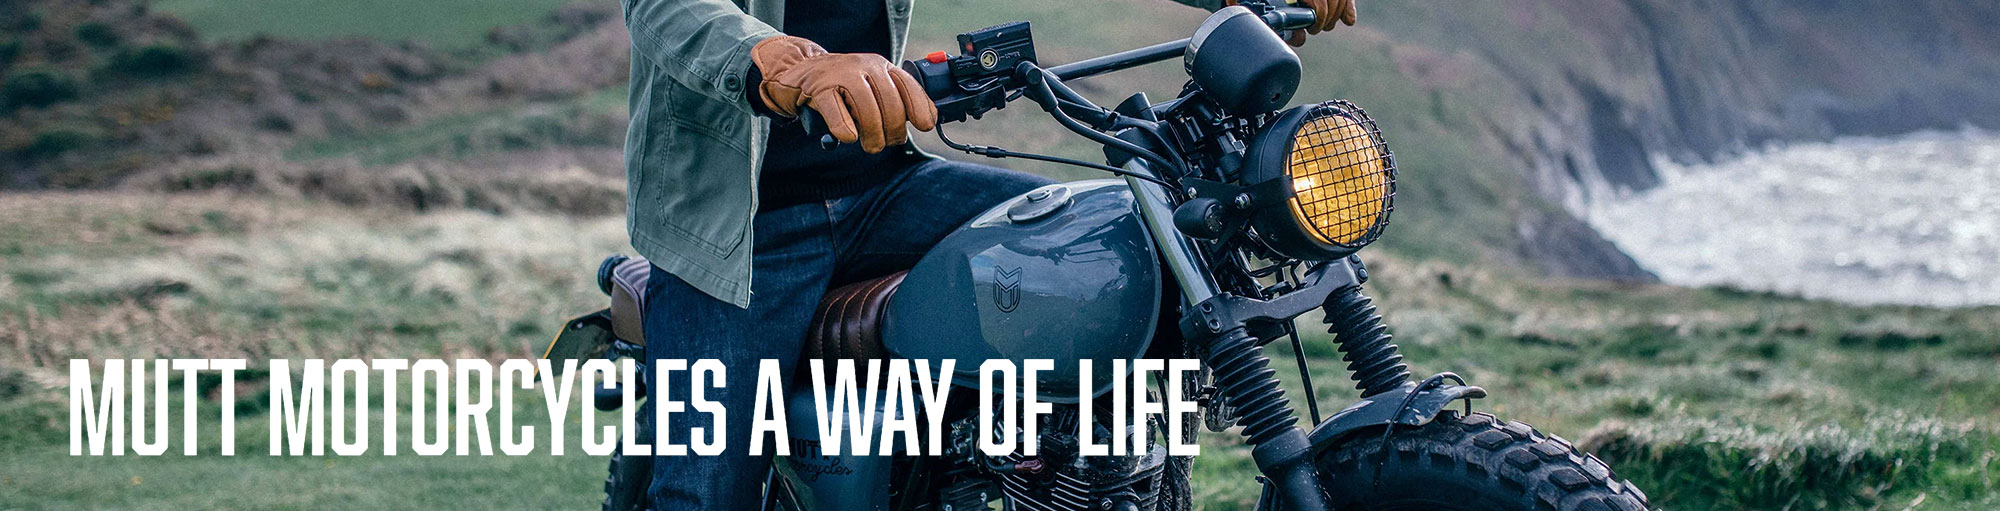 Mutt Motorcycles Way of Life